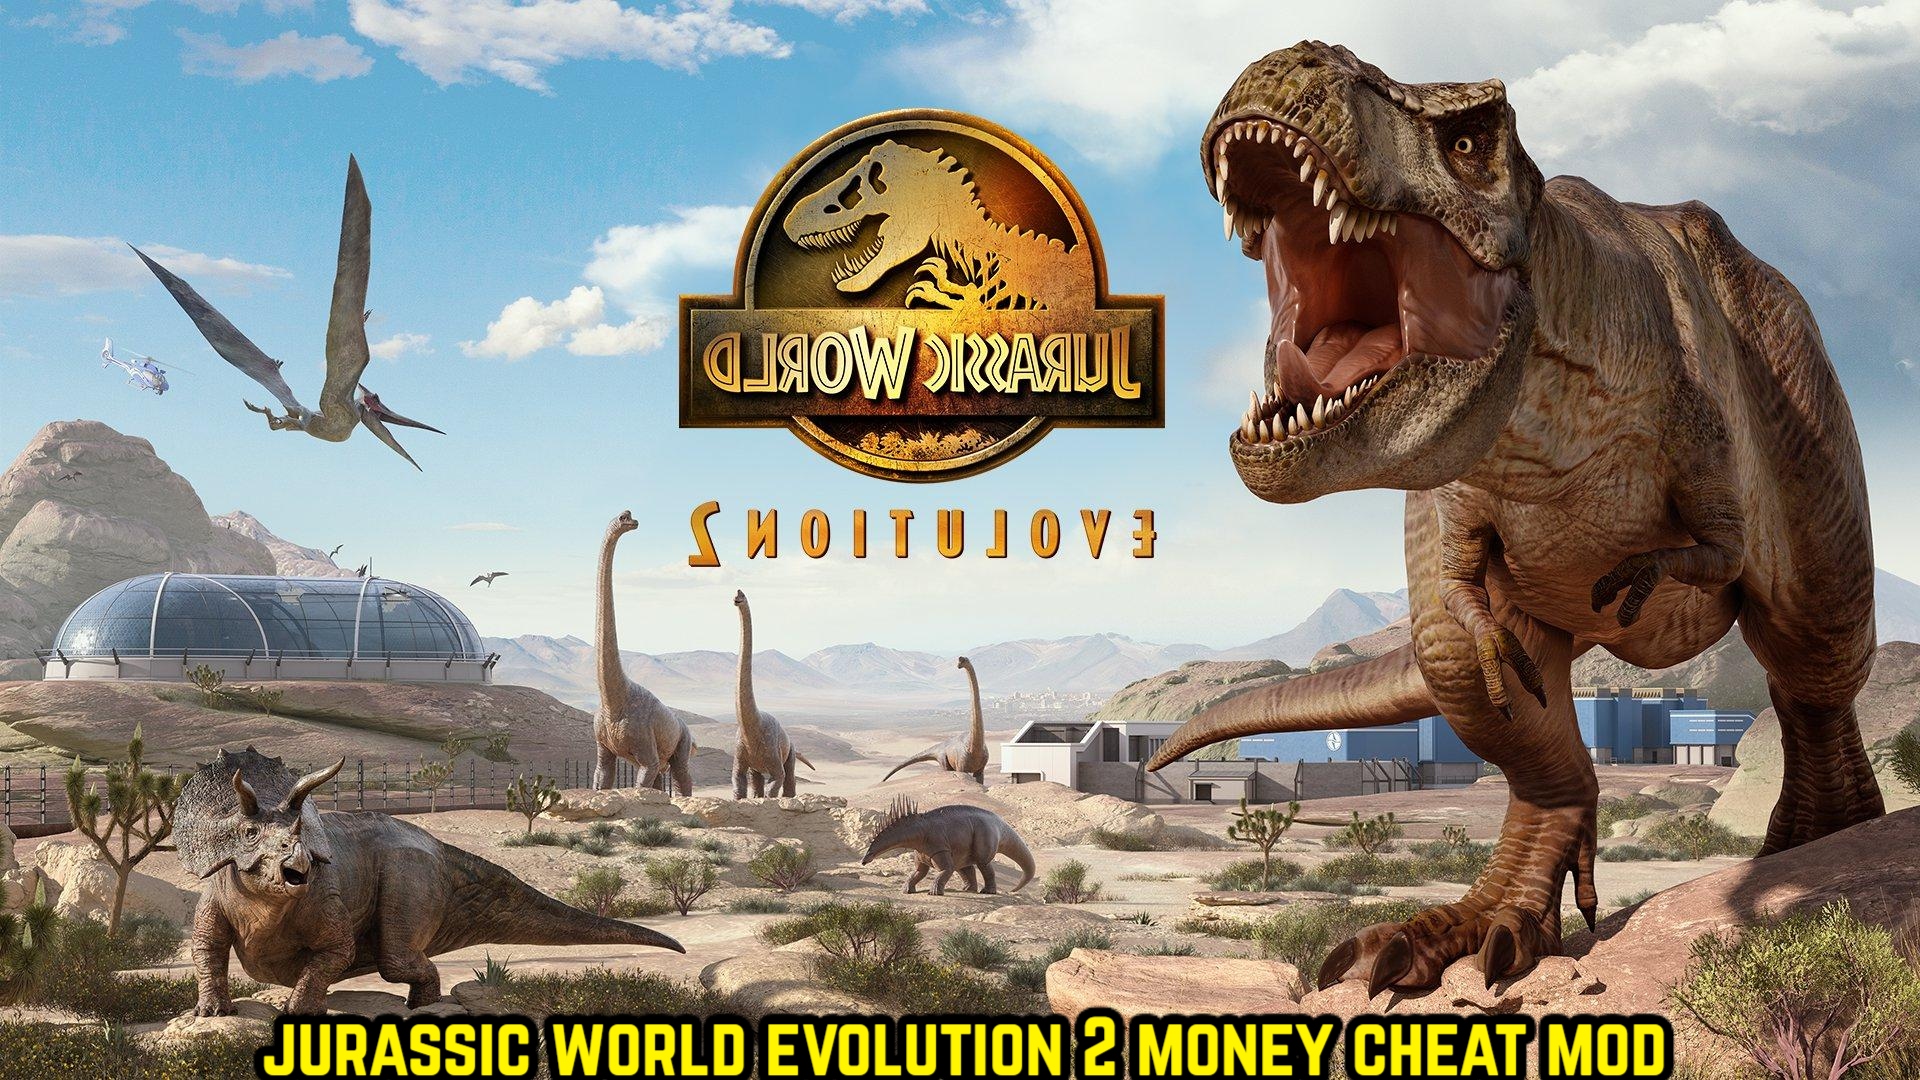 You are currently viewing Jurassic World Evolution 2 Money Cheat Mod